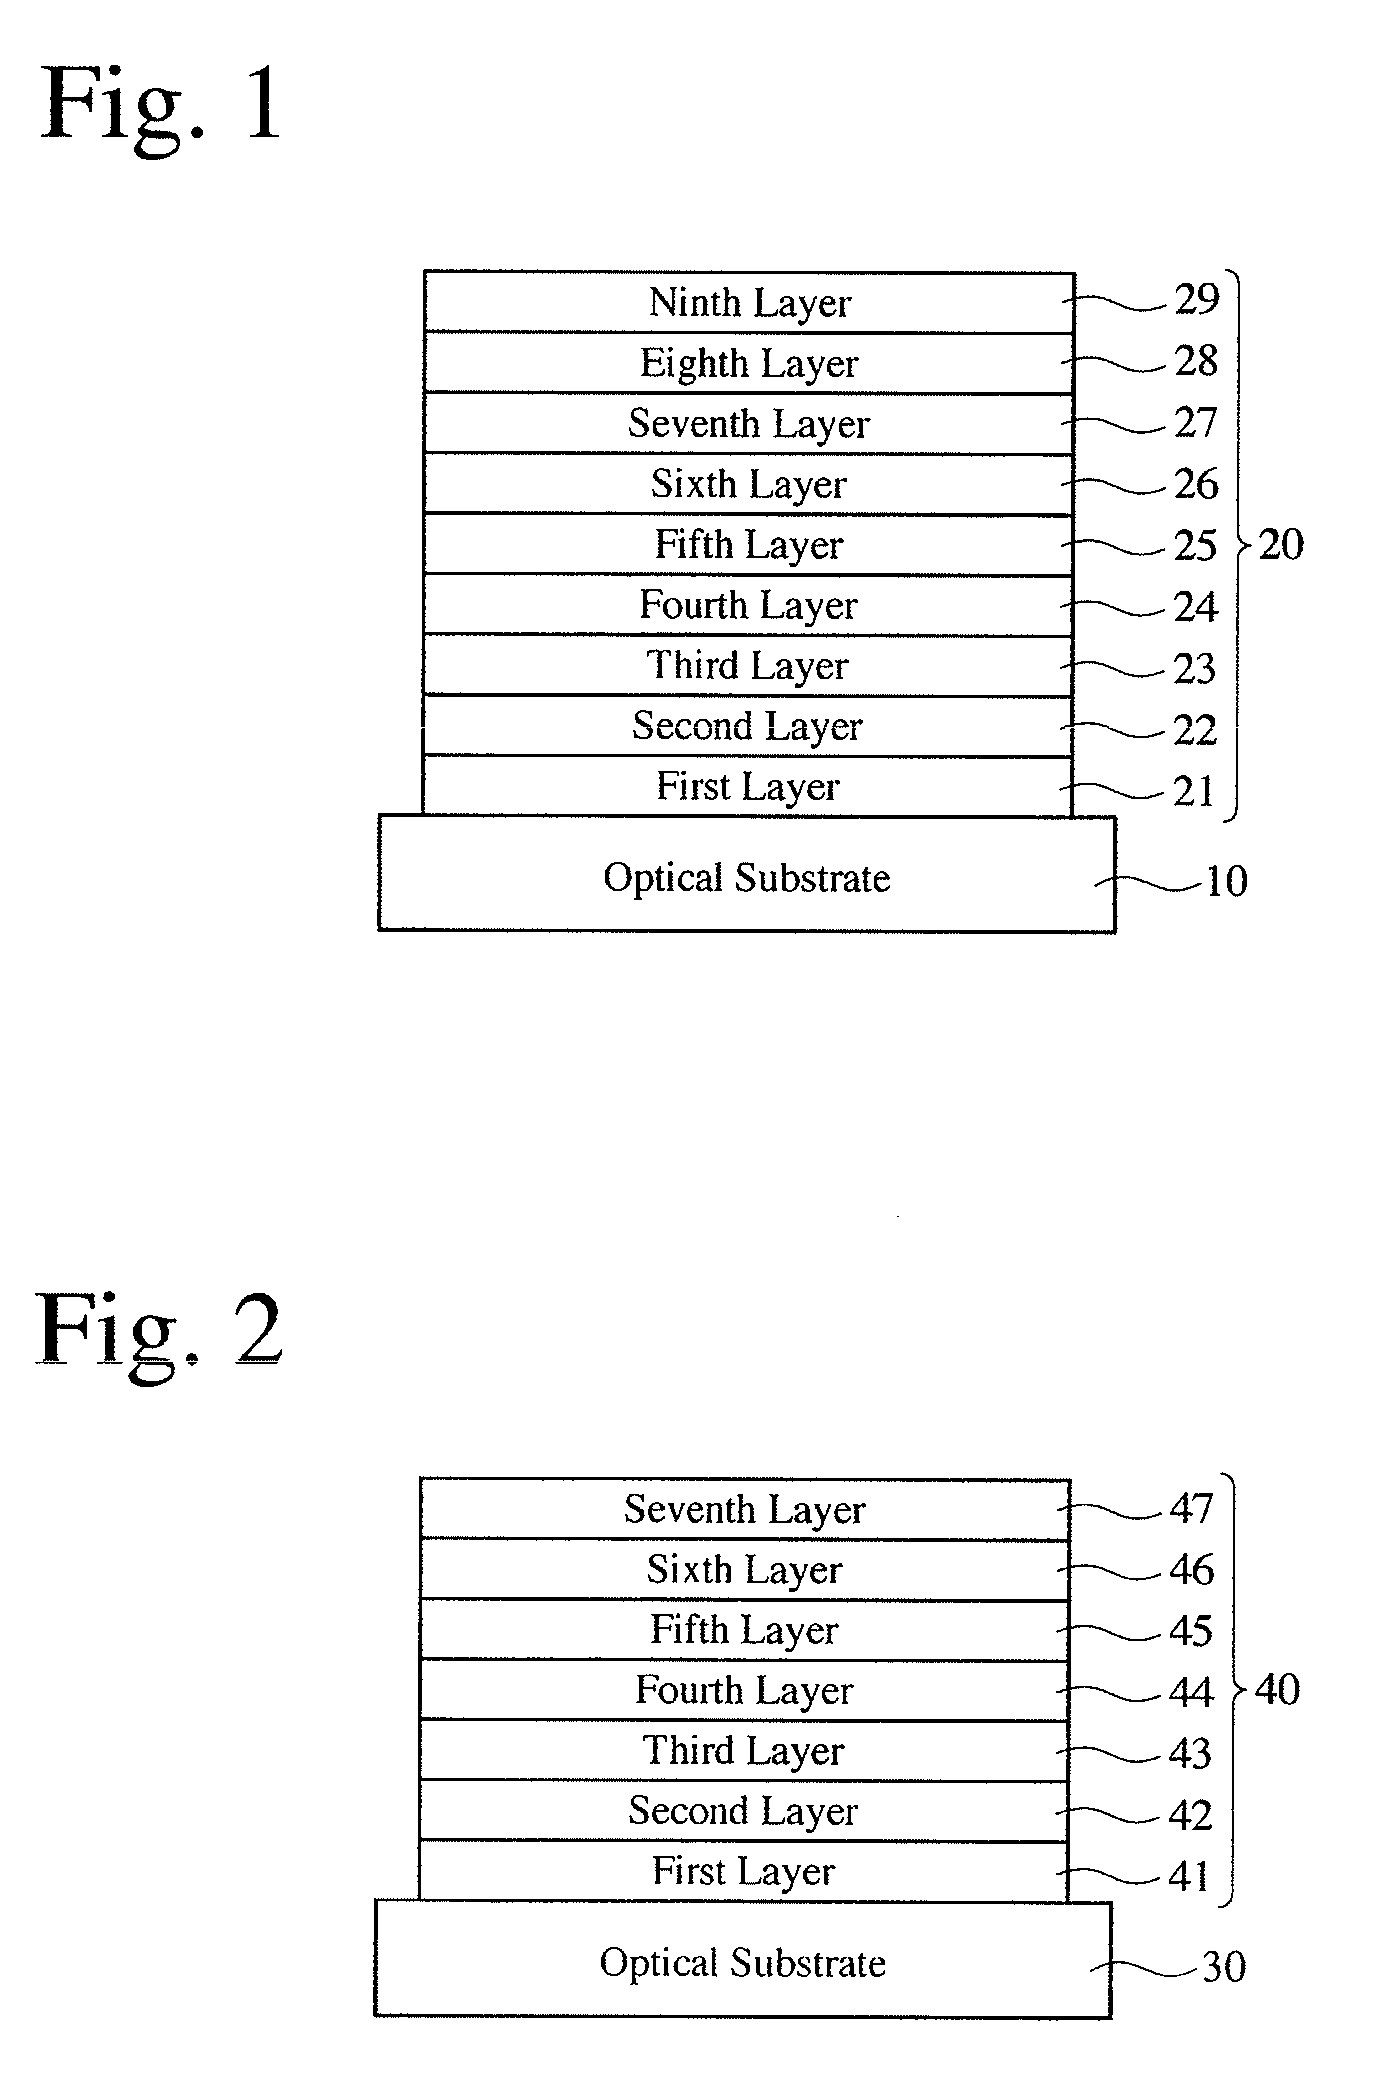 Anti-reflection coating, optical member having it, and optical equipment comprising such optical member